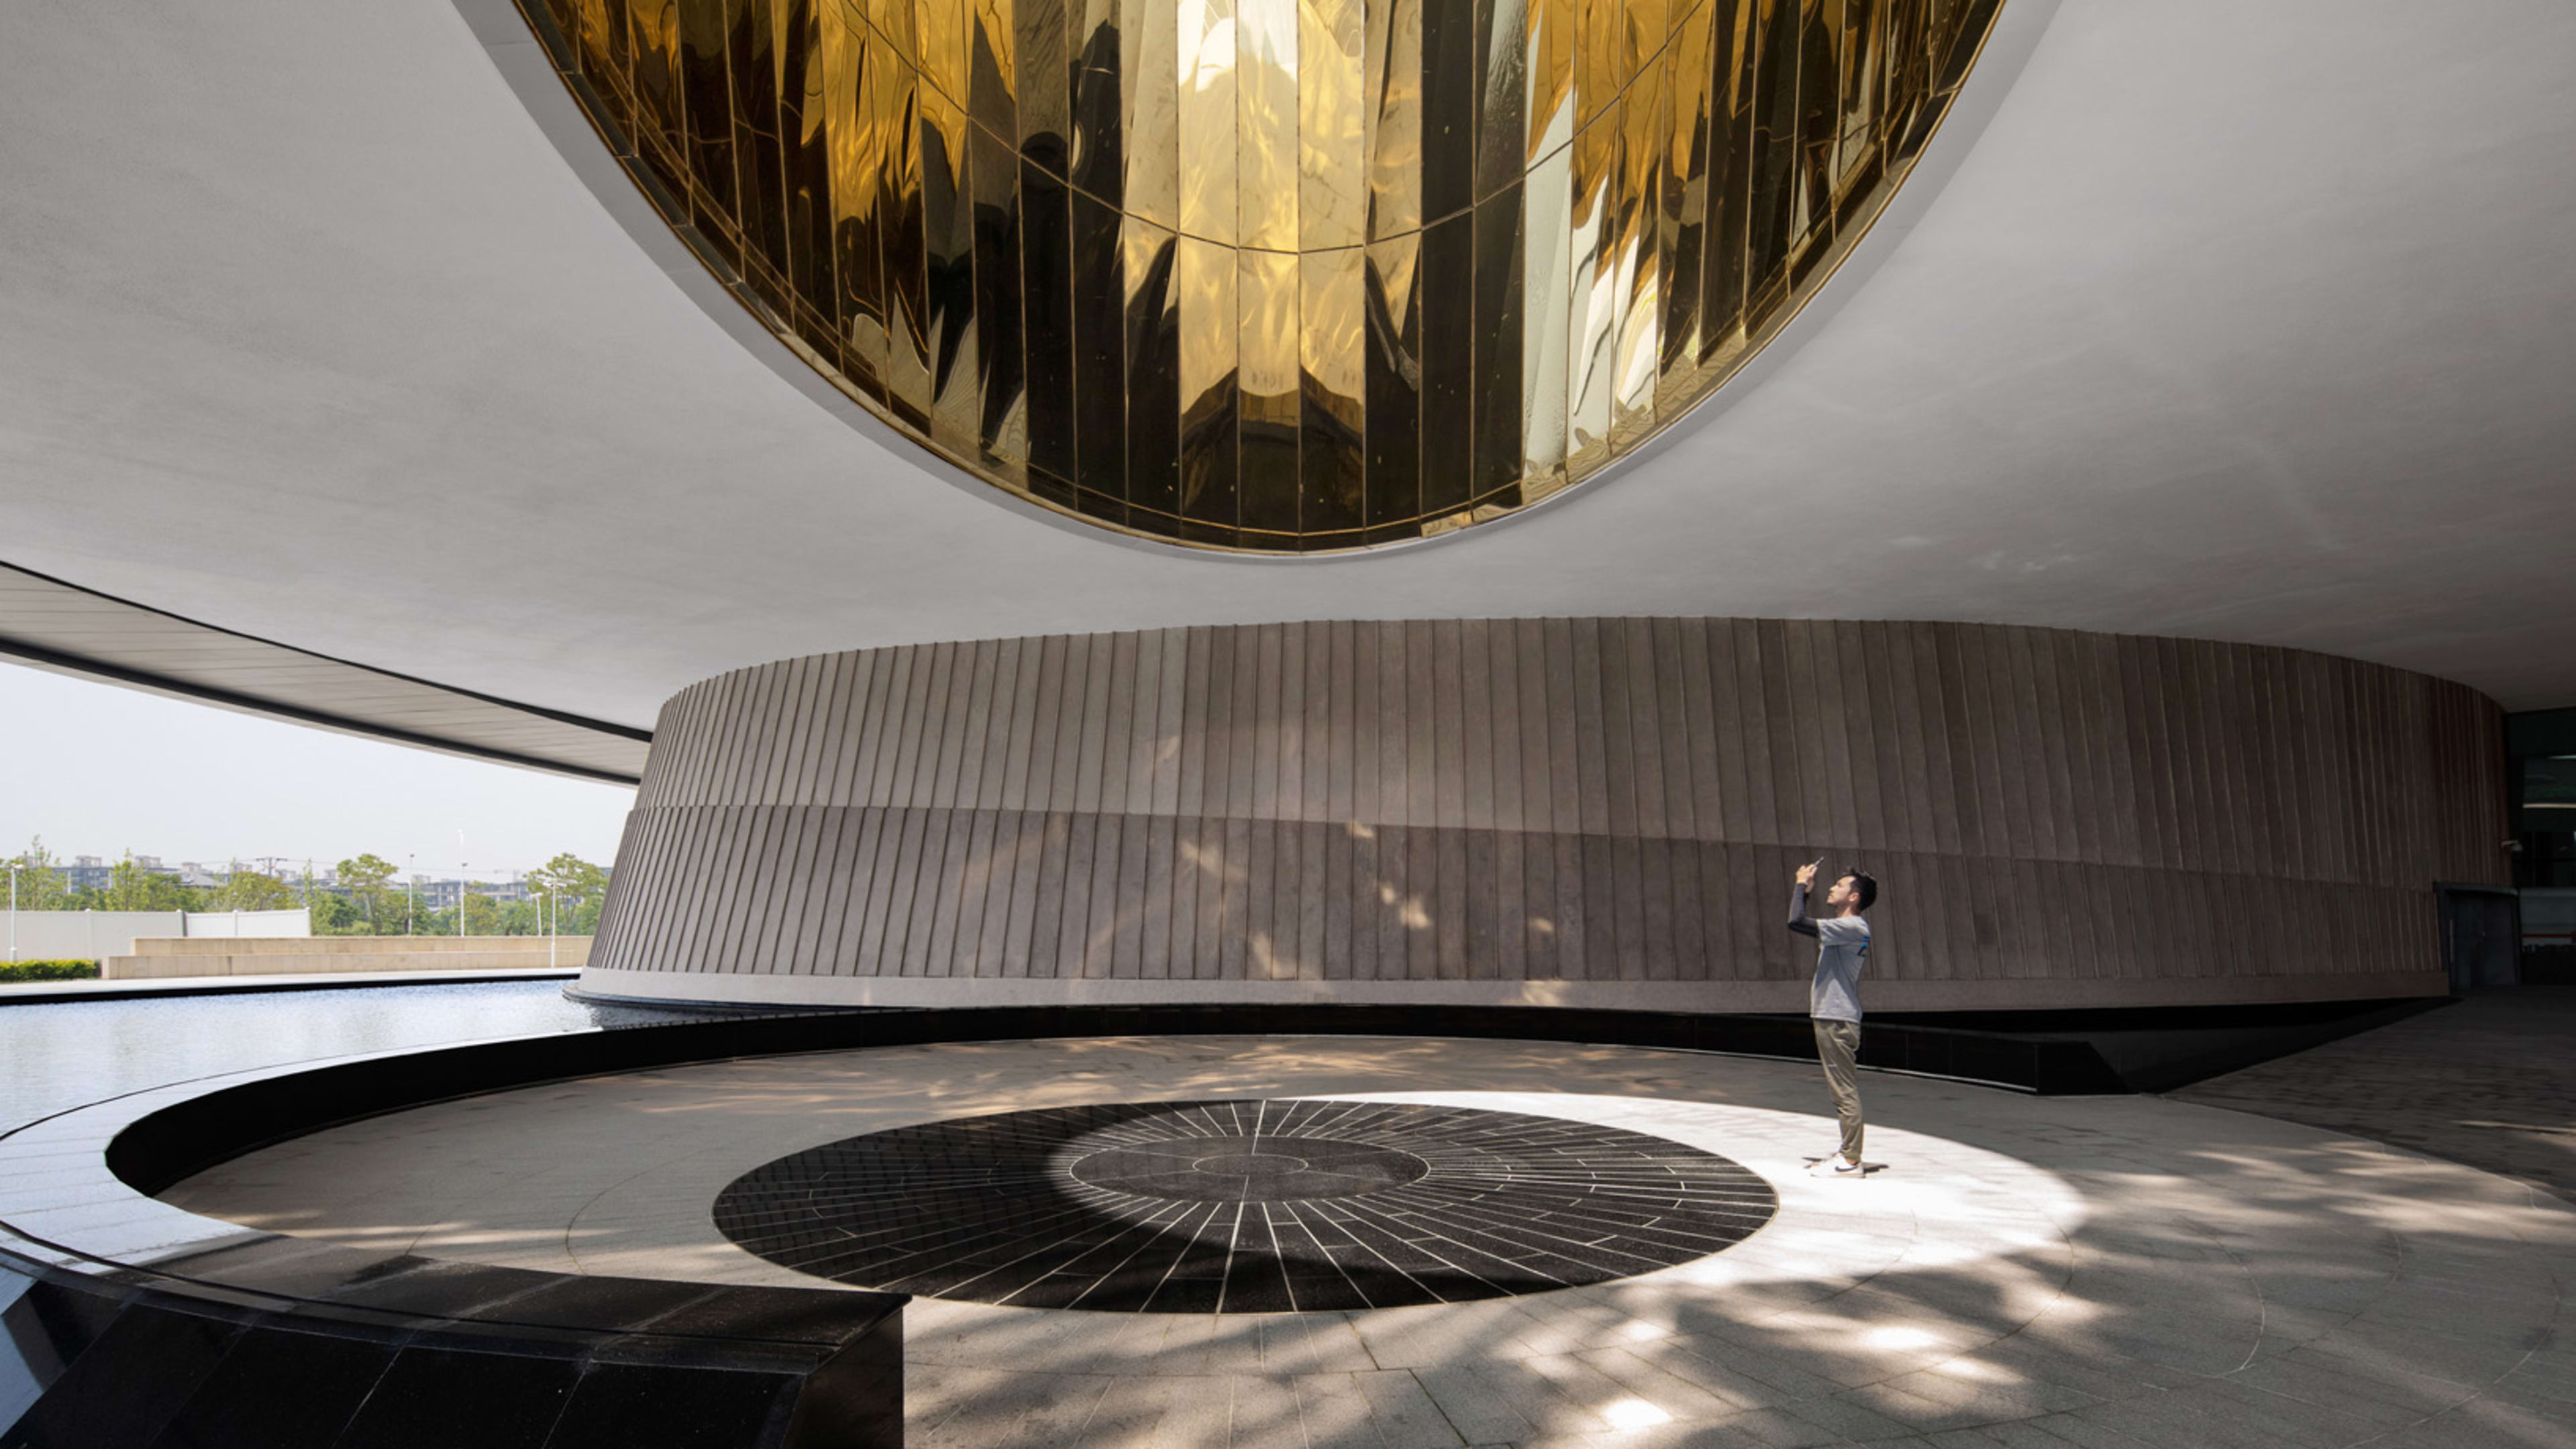 Propaganda or architectural masterpiece? A mesmerizing space museum rises in Shanghai